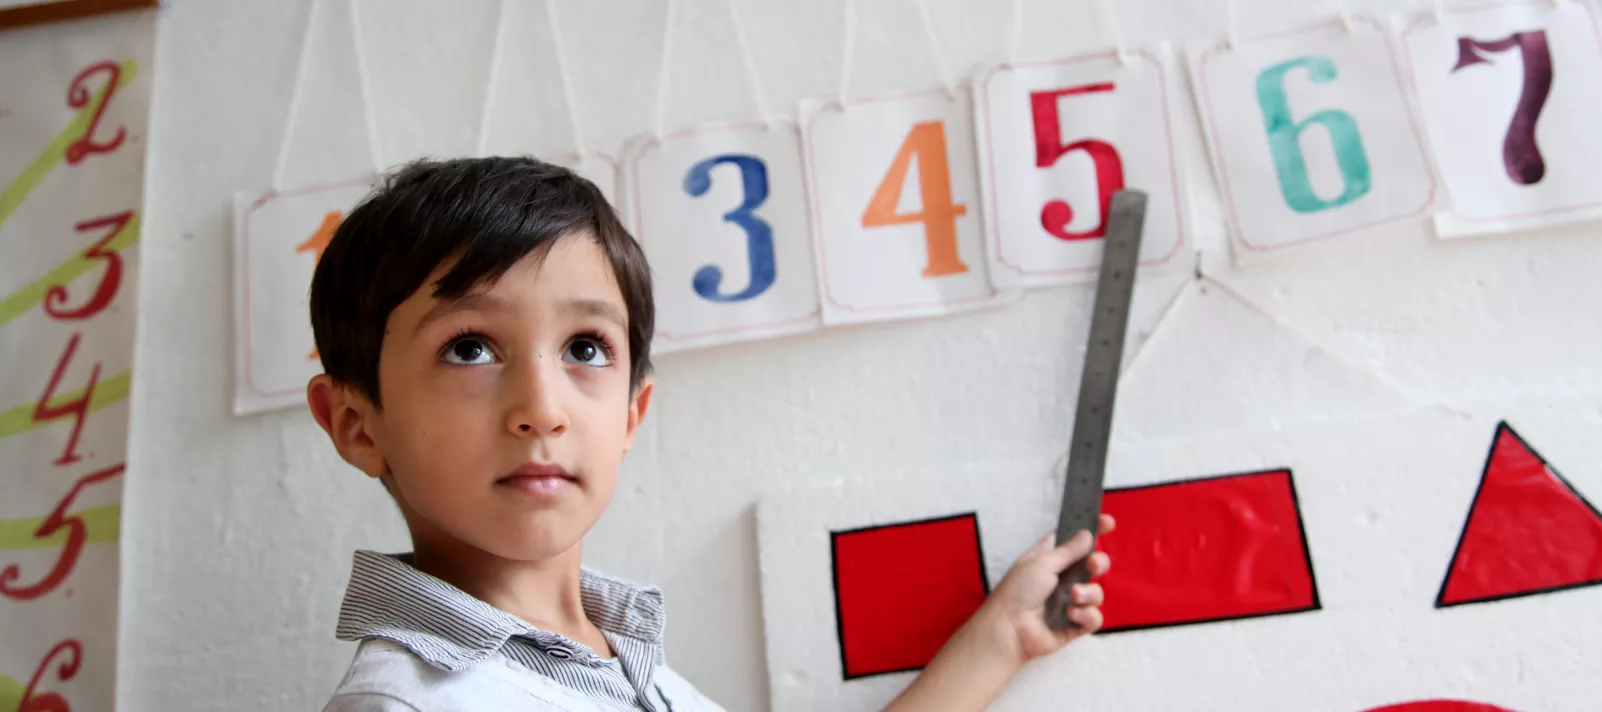 A boy learns how to read numbers.